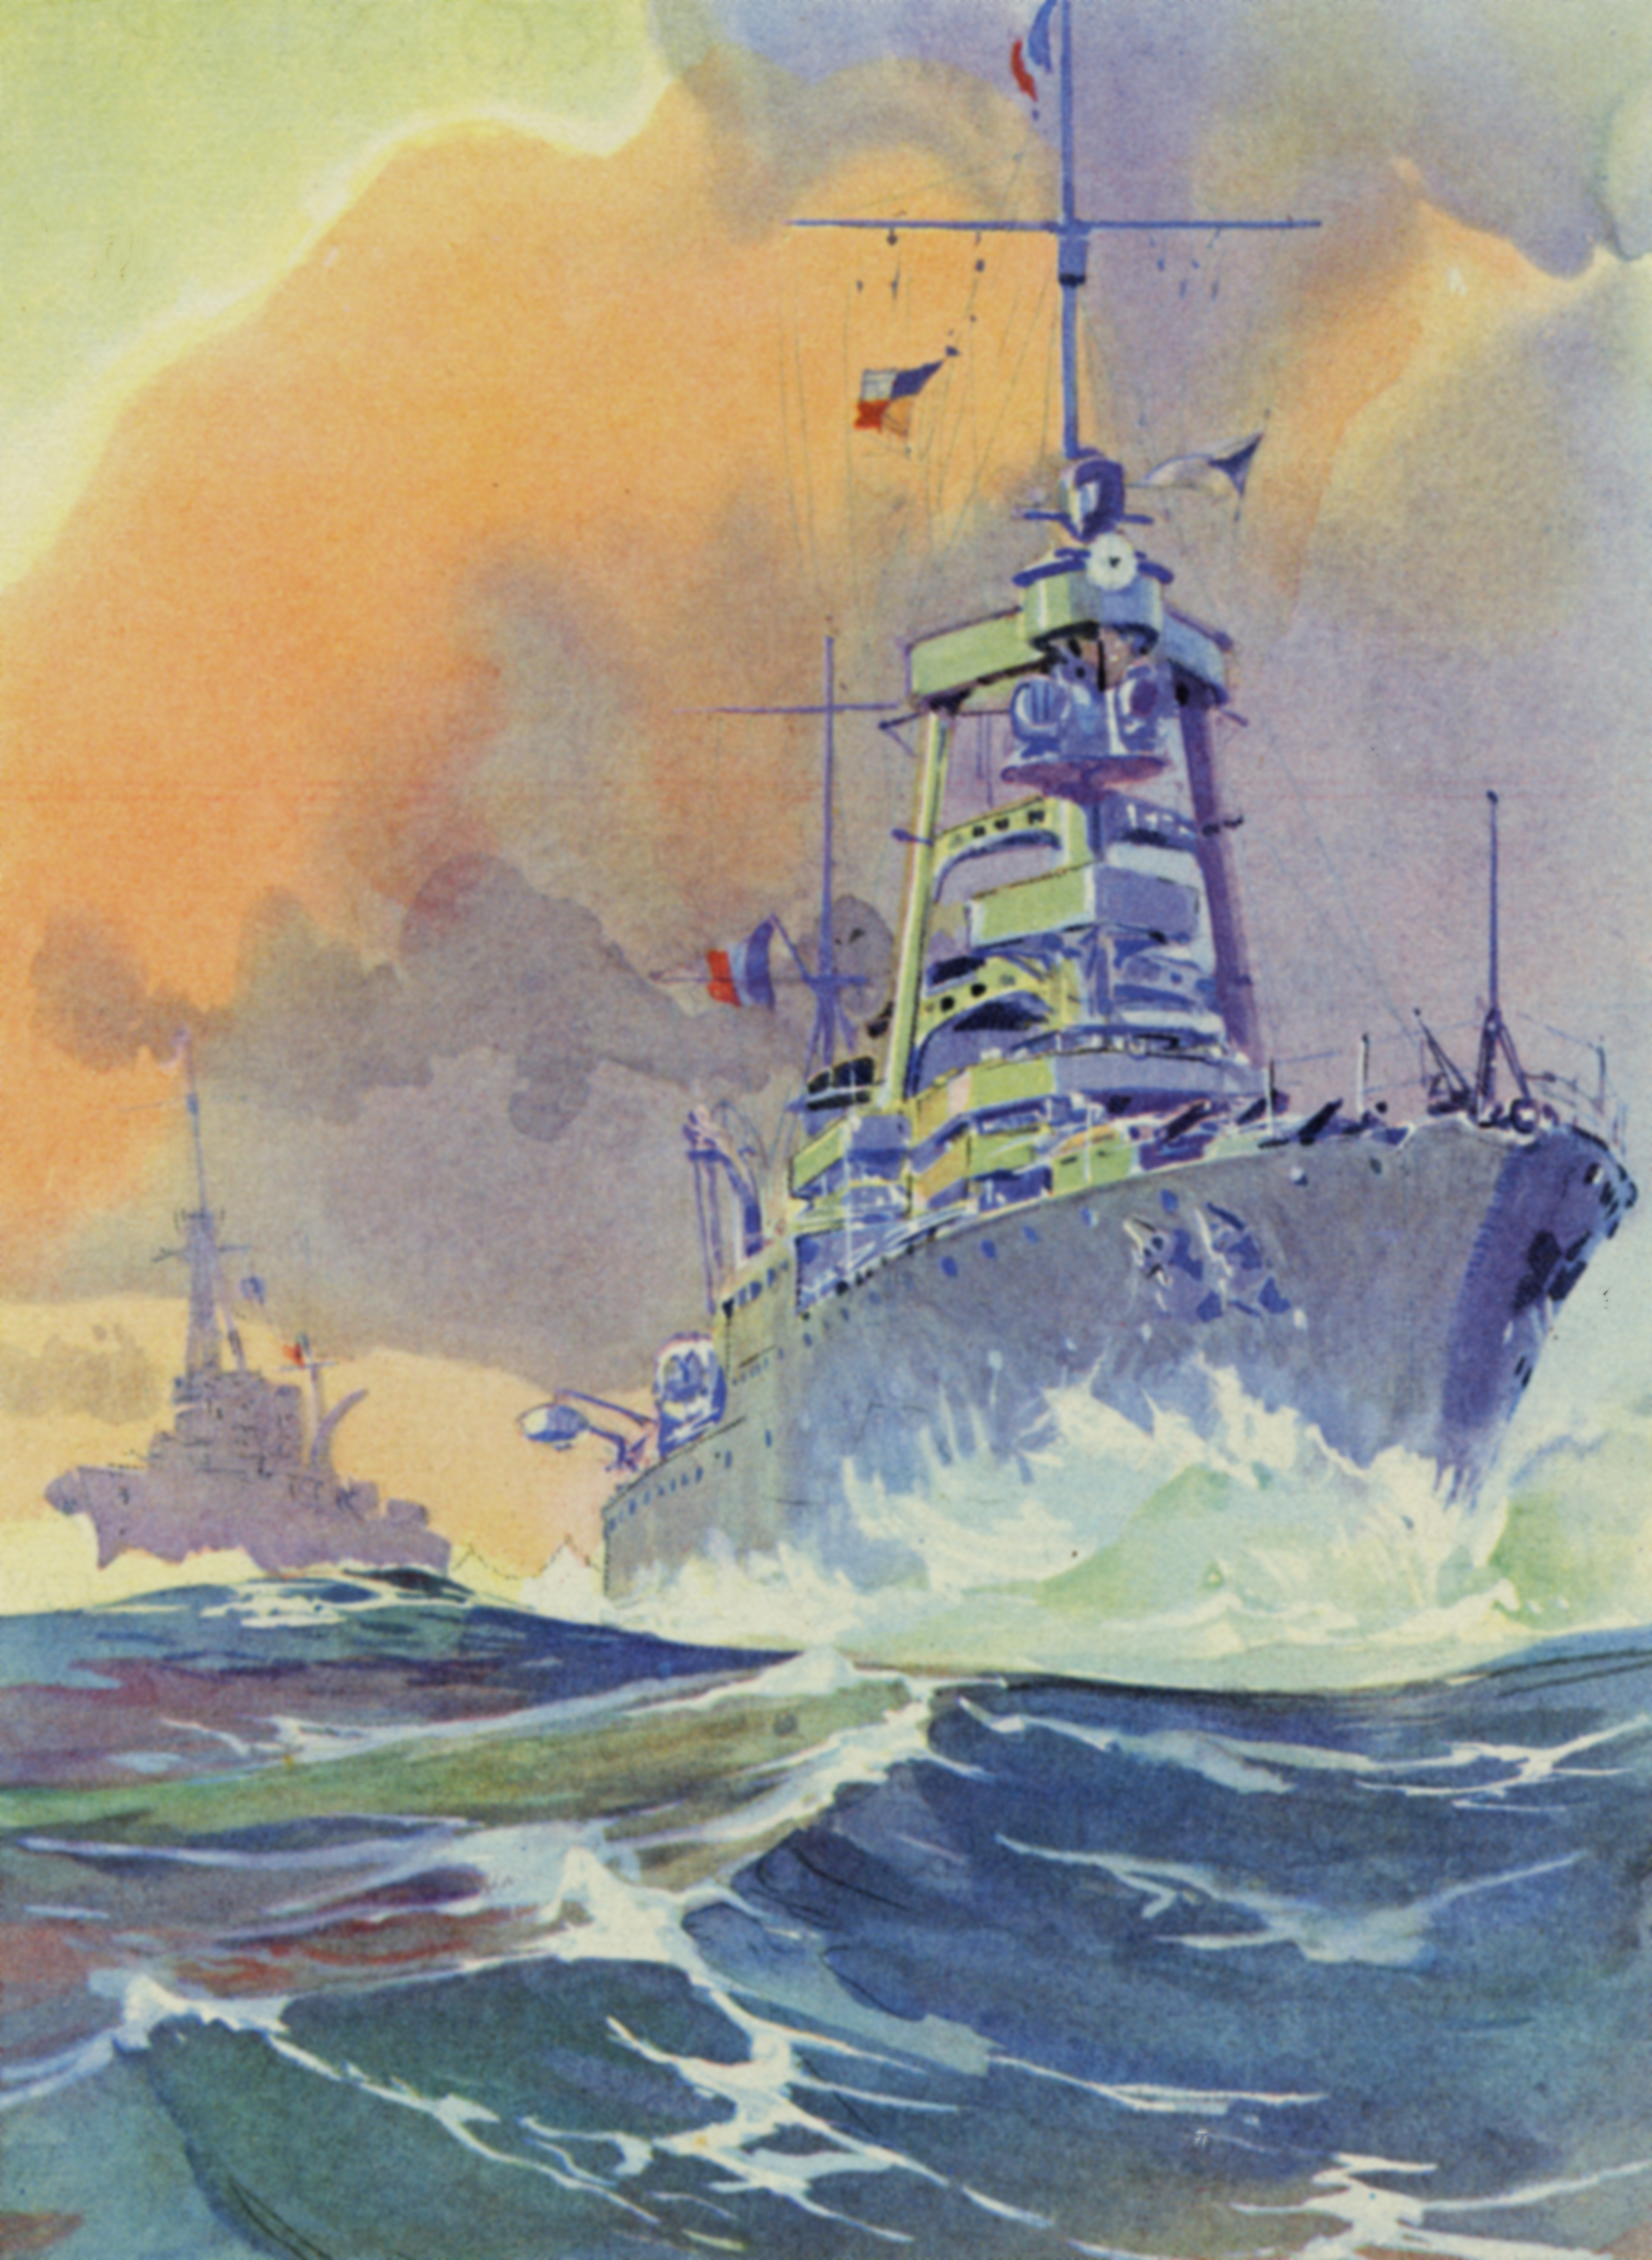 A painting of Marine Nationale Cruisers.